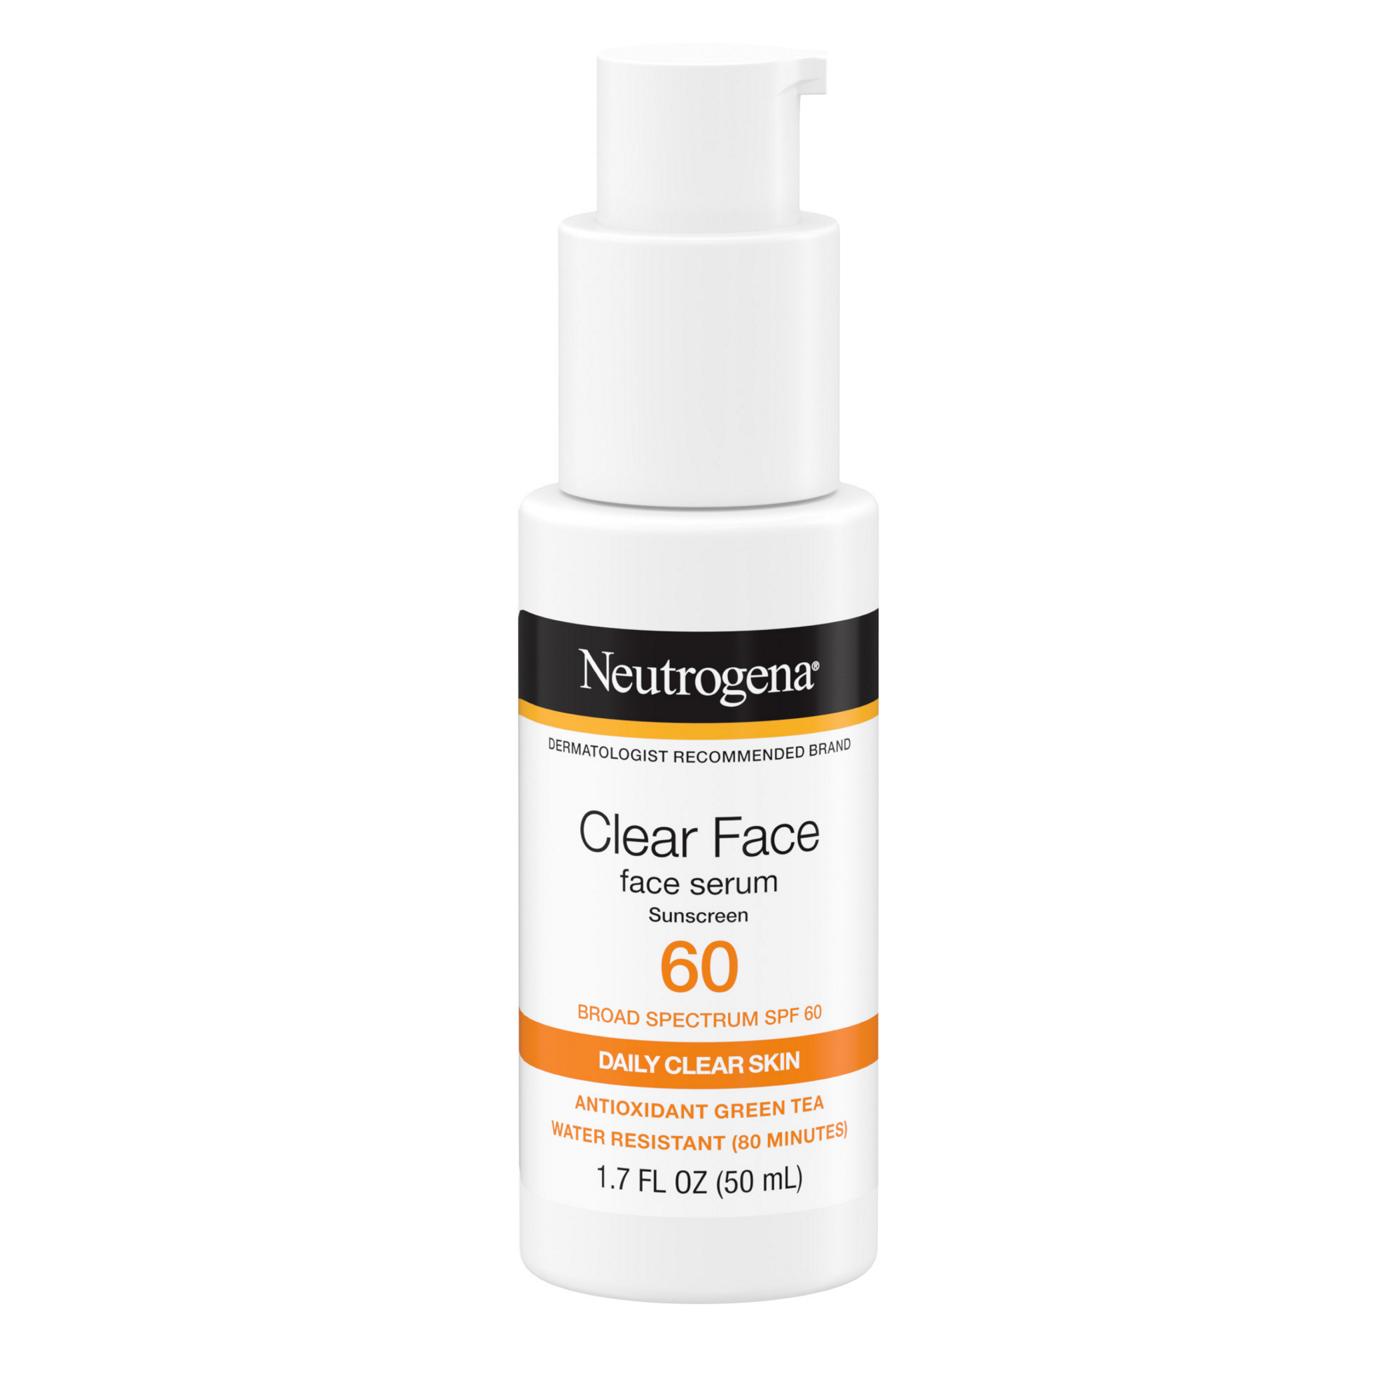 Neutrogena Clear Face Serum Sunscreen With Green Tea Broad Spectrum SPF 60+ Fragrance Free; image 7 of 8